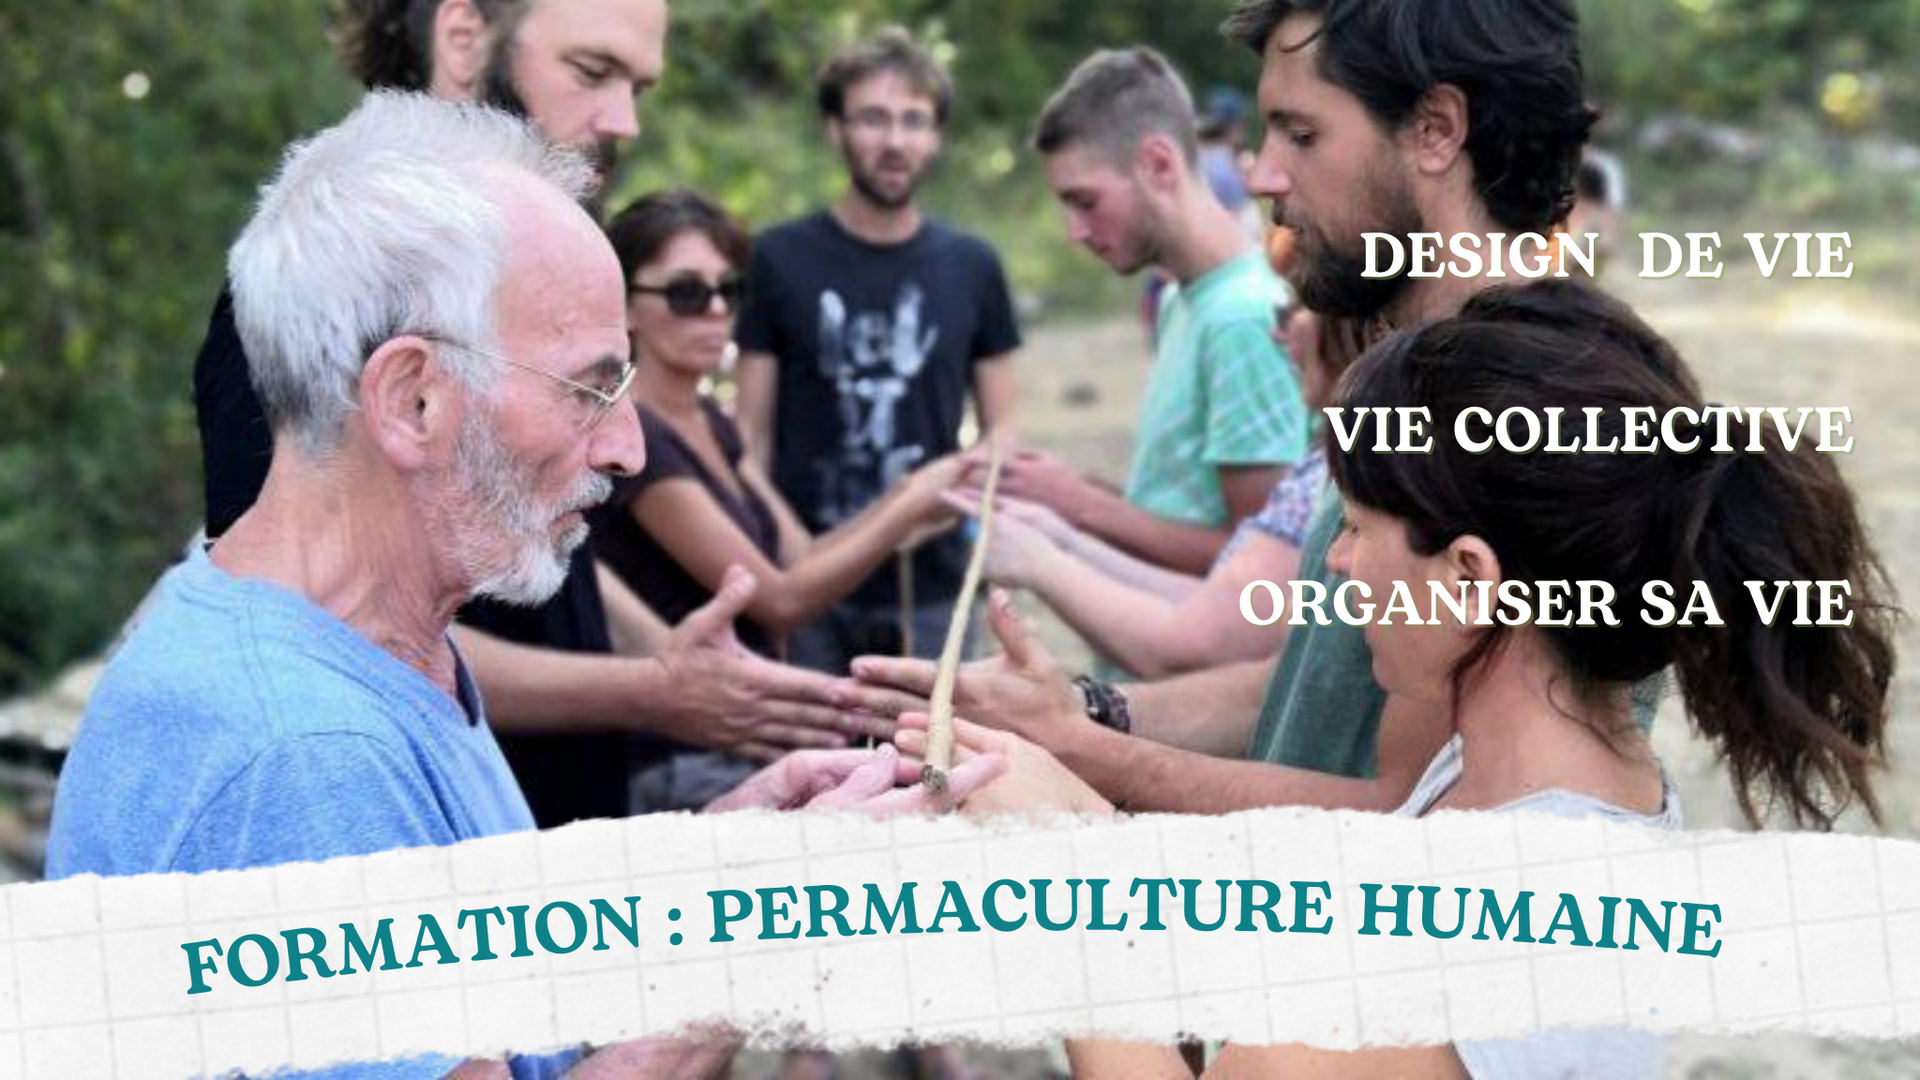 FORMATION : Permaculture humaine